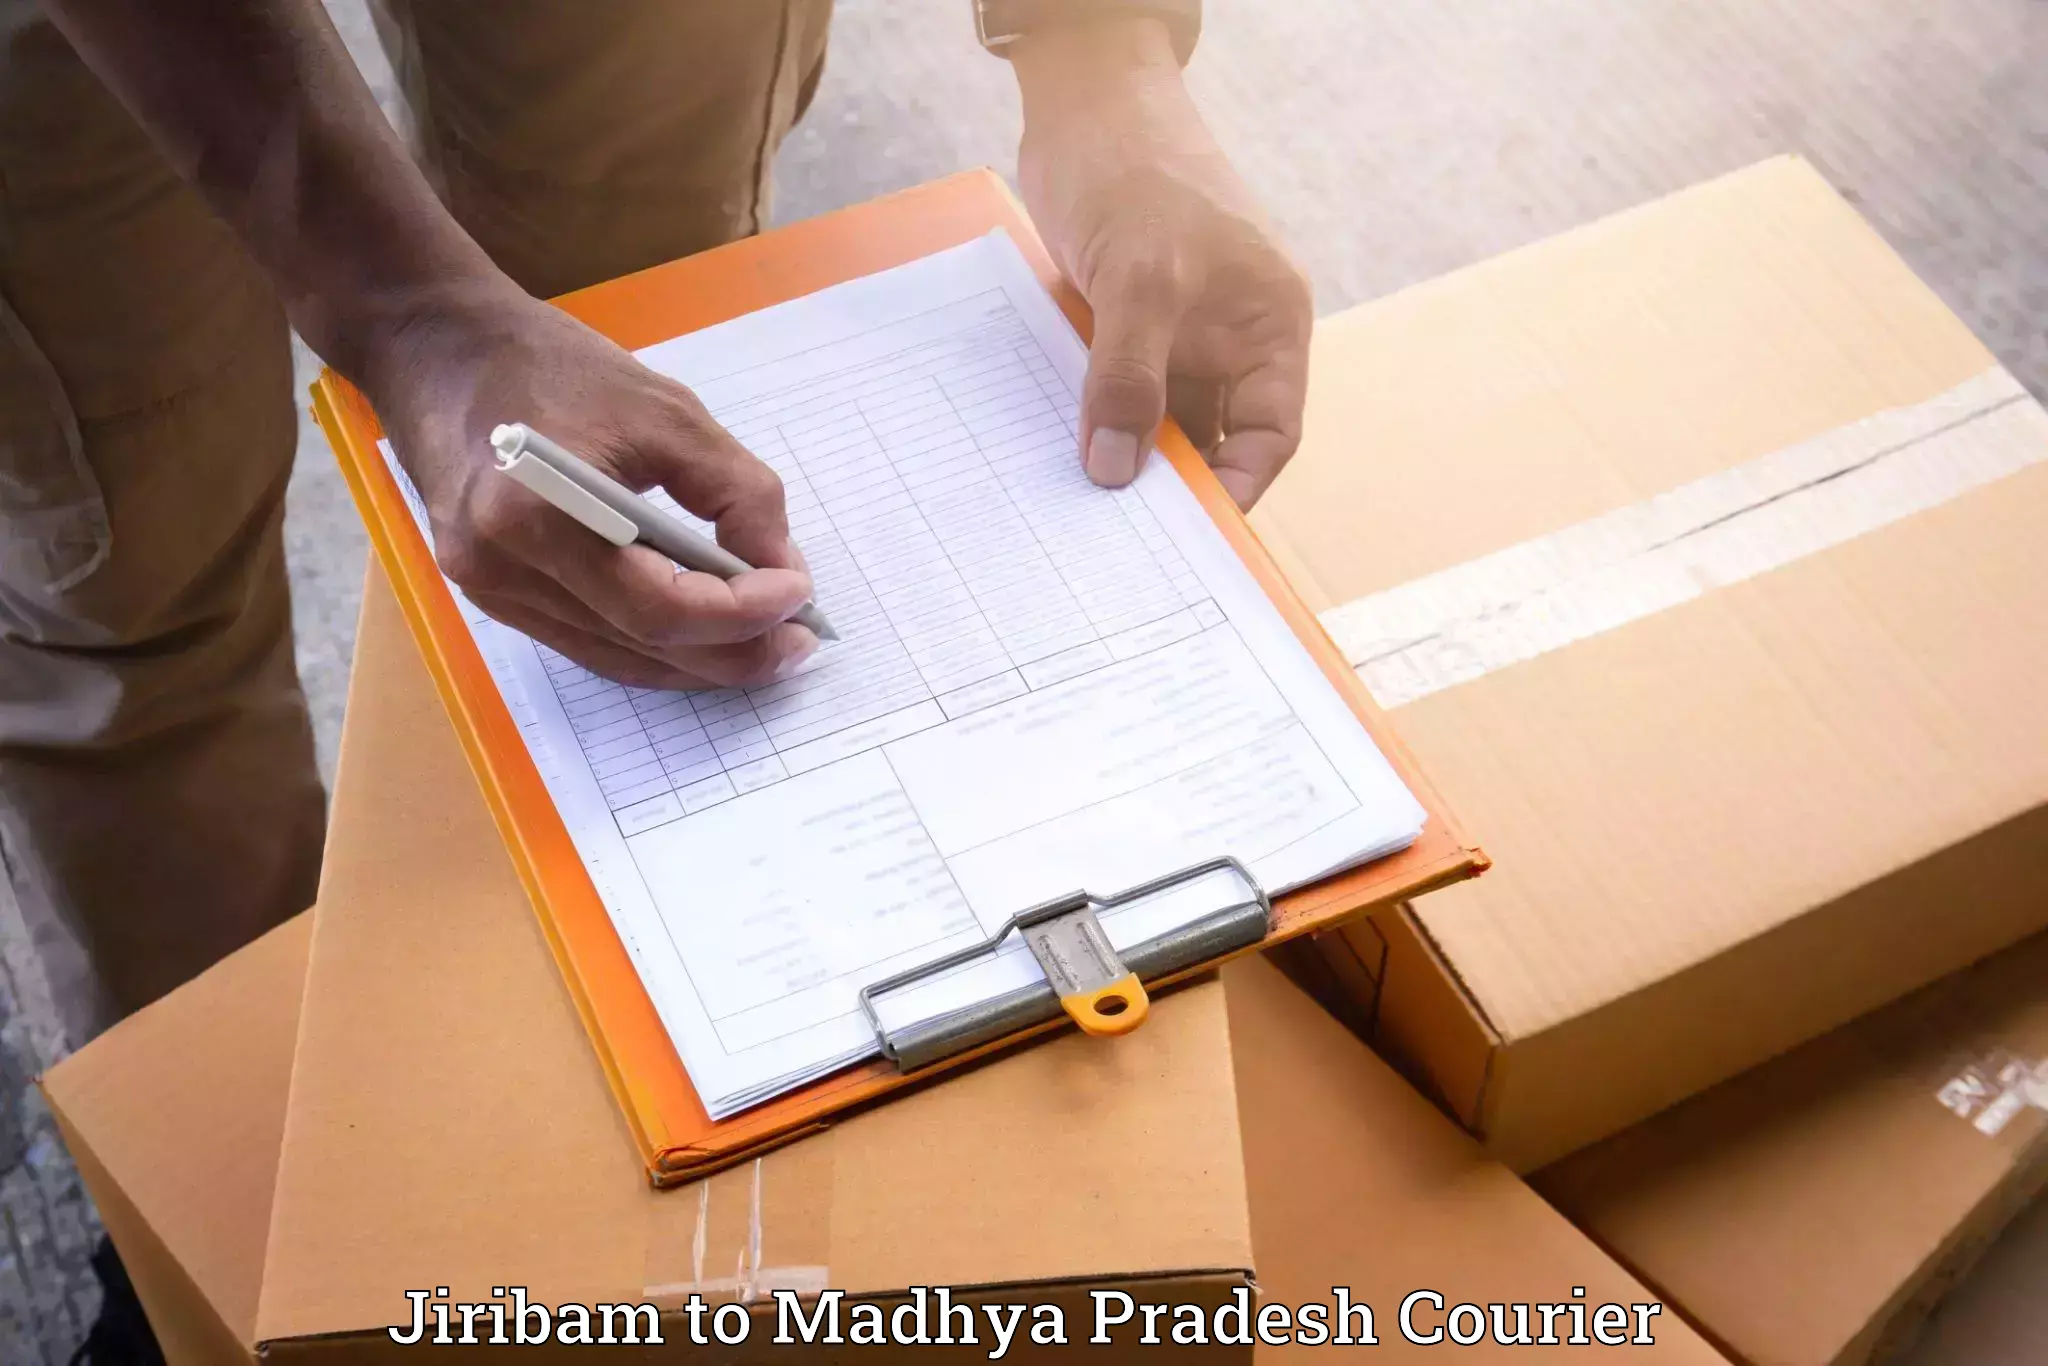 Furniture relocation experts in Jiribam to Pithampur